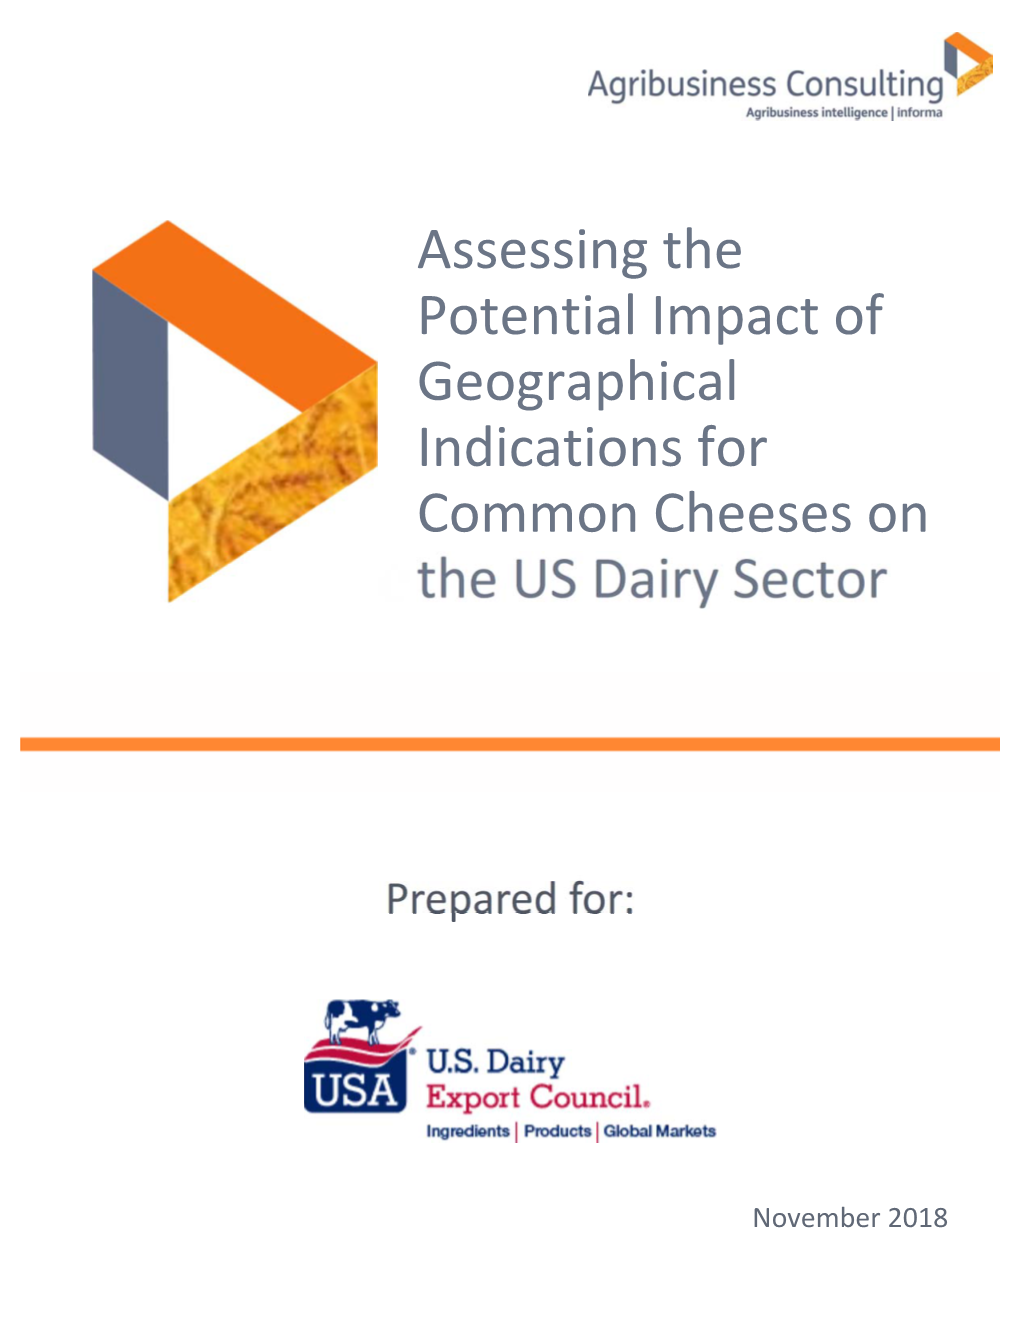 Assessing the Potential Impact of Geographical Indications for Common Cheeses on E the US Dairy Sector